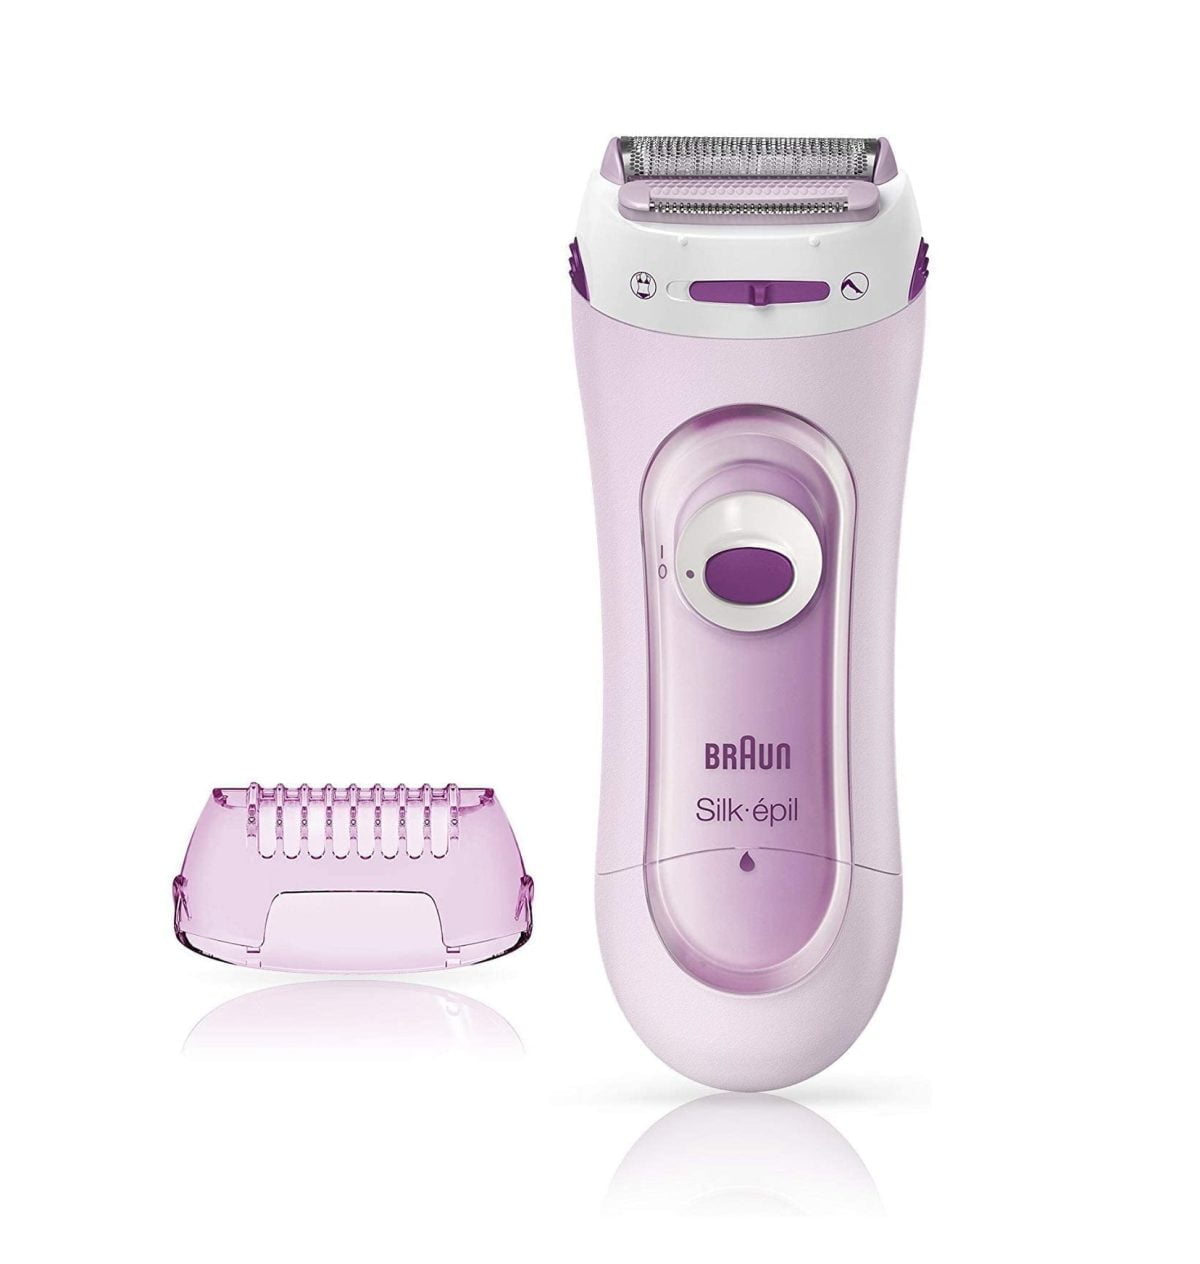 61Gw5Hkvs6L. Ac Sl1500 Braun &Amp;Lt;H1&Amp;Gt;Braun Silk-Épil Lady Shaver 5-103 - Cordless Electric Shaver And Trimmer System&Amp;Lt;/H1&Amp;Gt; Https://Www.youtube.com/Watch?V=2Fxya7Wkq6O &Amp;Lt;Ul Class=&Amp;Quot;A-Unordered-List A-Vertical A-Spacing-Mini&Amp;Quot;&Amp;Gt; &Amp;Lt;Li&Amp;Gt;&Amp;Lt;Span Class=&Amp;Quot;A-List-Item&Amp;Quot;&Amp;Gt; Cordless Electric Lady Shaver &Amp;Lt;/Span&Amp;Gt;&Amp;Lt;/Li&Amp;Gt; &Amp;Lt;Li&Amp;Gt;&Amp;Lt;Span Class=&Amp;Quot;A-List-Item&Amp;Quot;&Amp;Gt; Floating Foil And Trimmer For A Close Shave On Legs, Underarms Or Bikini Line &Amp;Lt;/Span&Amp;Gt;&Amp;Lt;/Li&Amp;Gt; &Amp;Lt;Li&Amp;Gt;&Amp;Lt;Span Class=&Amp;Quot;A-List-Item&Amp;Quot;&Amp;Gt; Rounded Head Adapts To Body Contours &Amp;Lt;/Span&Amp;Gt;&Amp;Lt;/Li&Amp;Gt; &Amp;Lt;Li&Amp;Gt;&Amp;Lt;Span Class=&Amp;Quot;A-List-Item&Amp;Quot;&Amp;Gt; 1 Extra: Trimmer Cap For Bikini Line And Sensitive Areas &Amp;Lt;/Span&Amp;Gt;&Amp;Lt;/Li&Amp;Gt; &Amp;Lt;Li&Amp;Gt;&Amp;Lt;Span Class=&Amp;Quot;A-List-Item&Amp;Quot;&Amp;Gt; 2Xaa Batteries Are Included &Amp;Lt;/Span&Amp;Gt;&Amp;Lt;/Li&Amp;Gt; &Amp;Lt;/Ul&Amp;Gt; Braun Lady Shaver Braun Silk-Épil Lady Shaver Ls 5100 - Cordless Electric Shaver And Trimmer System